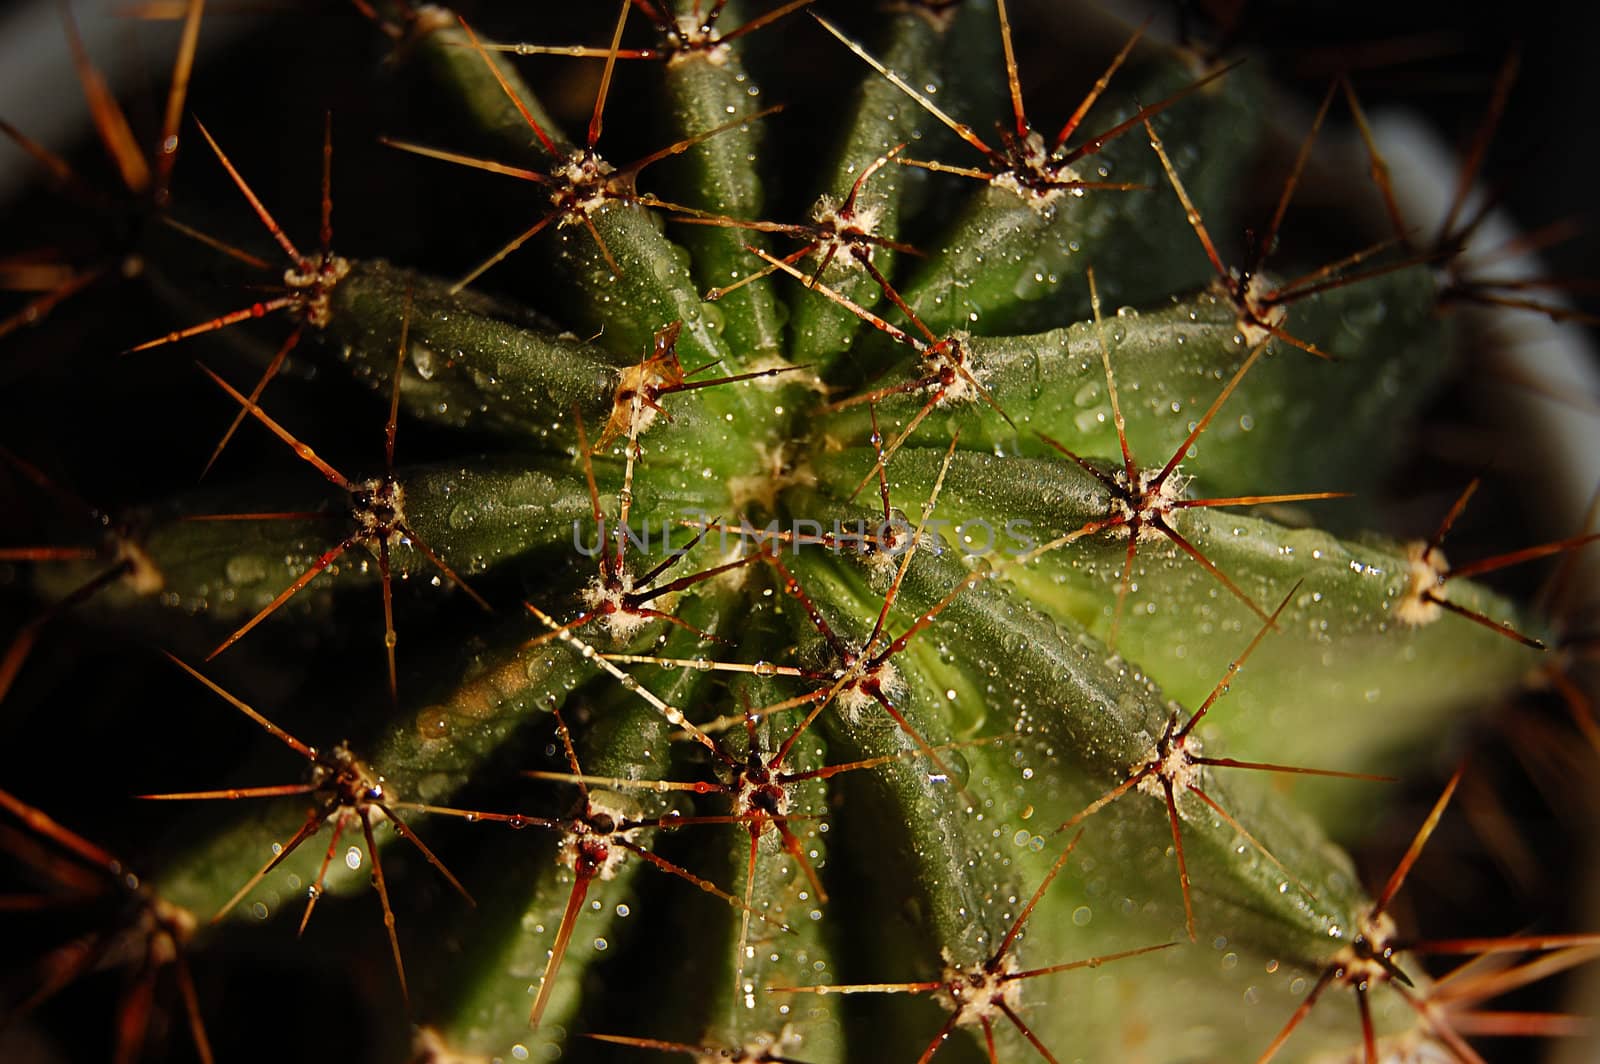 Thorns of green cactus in daylight